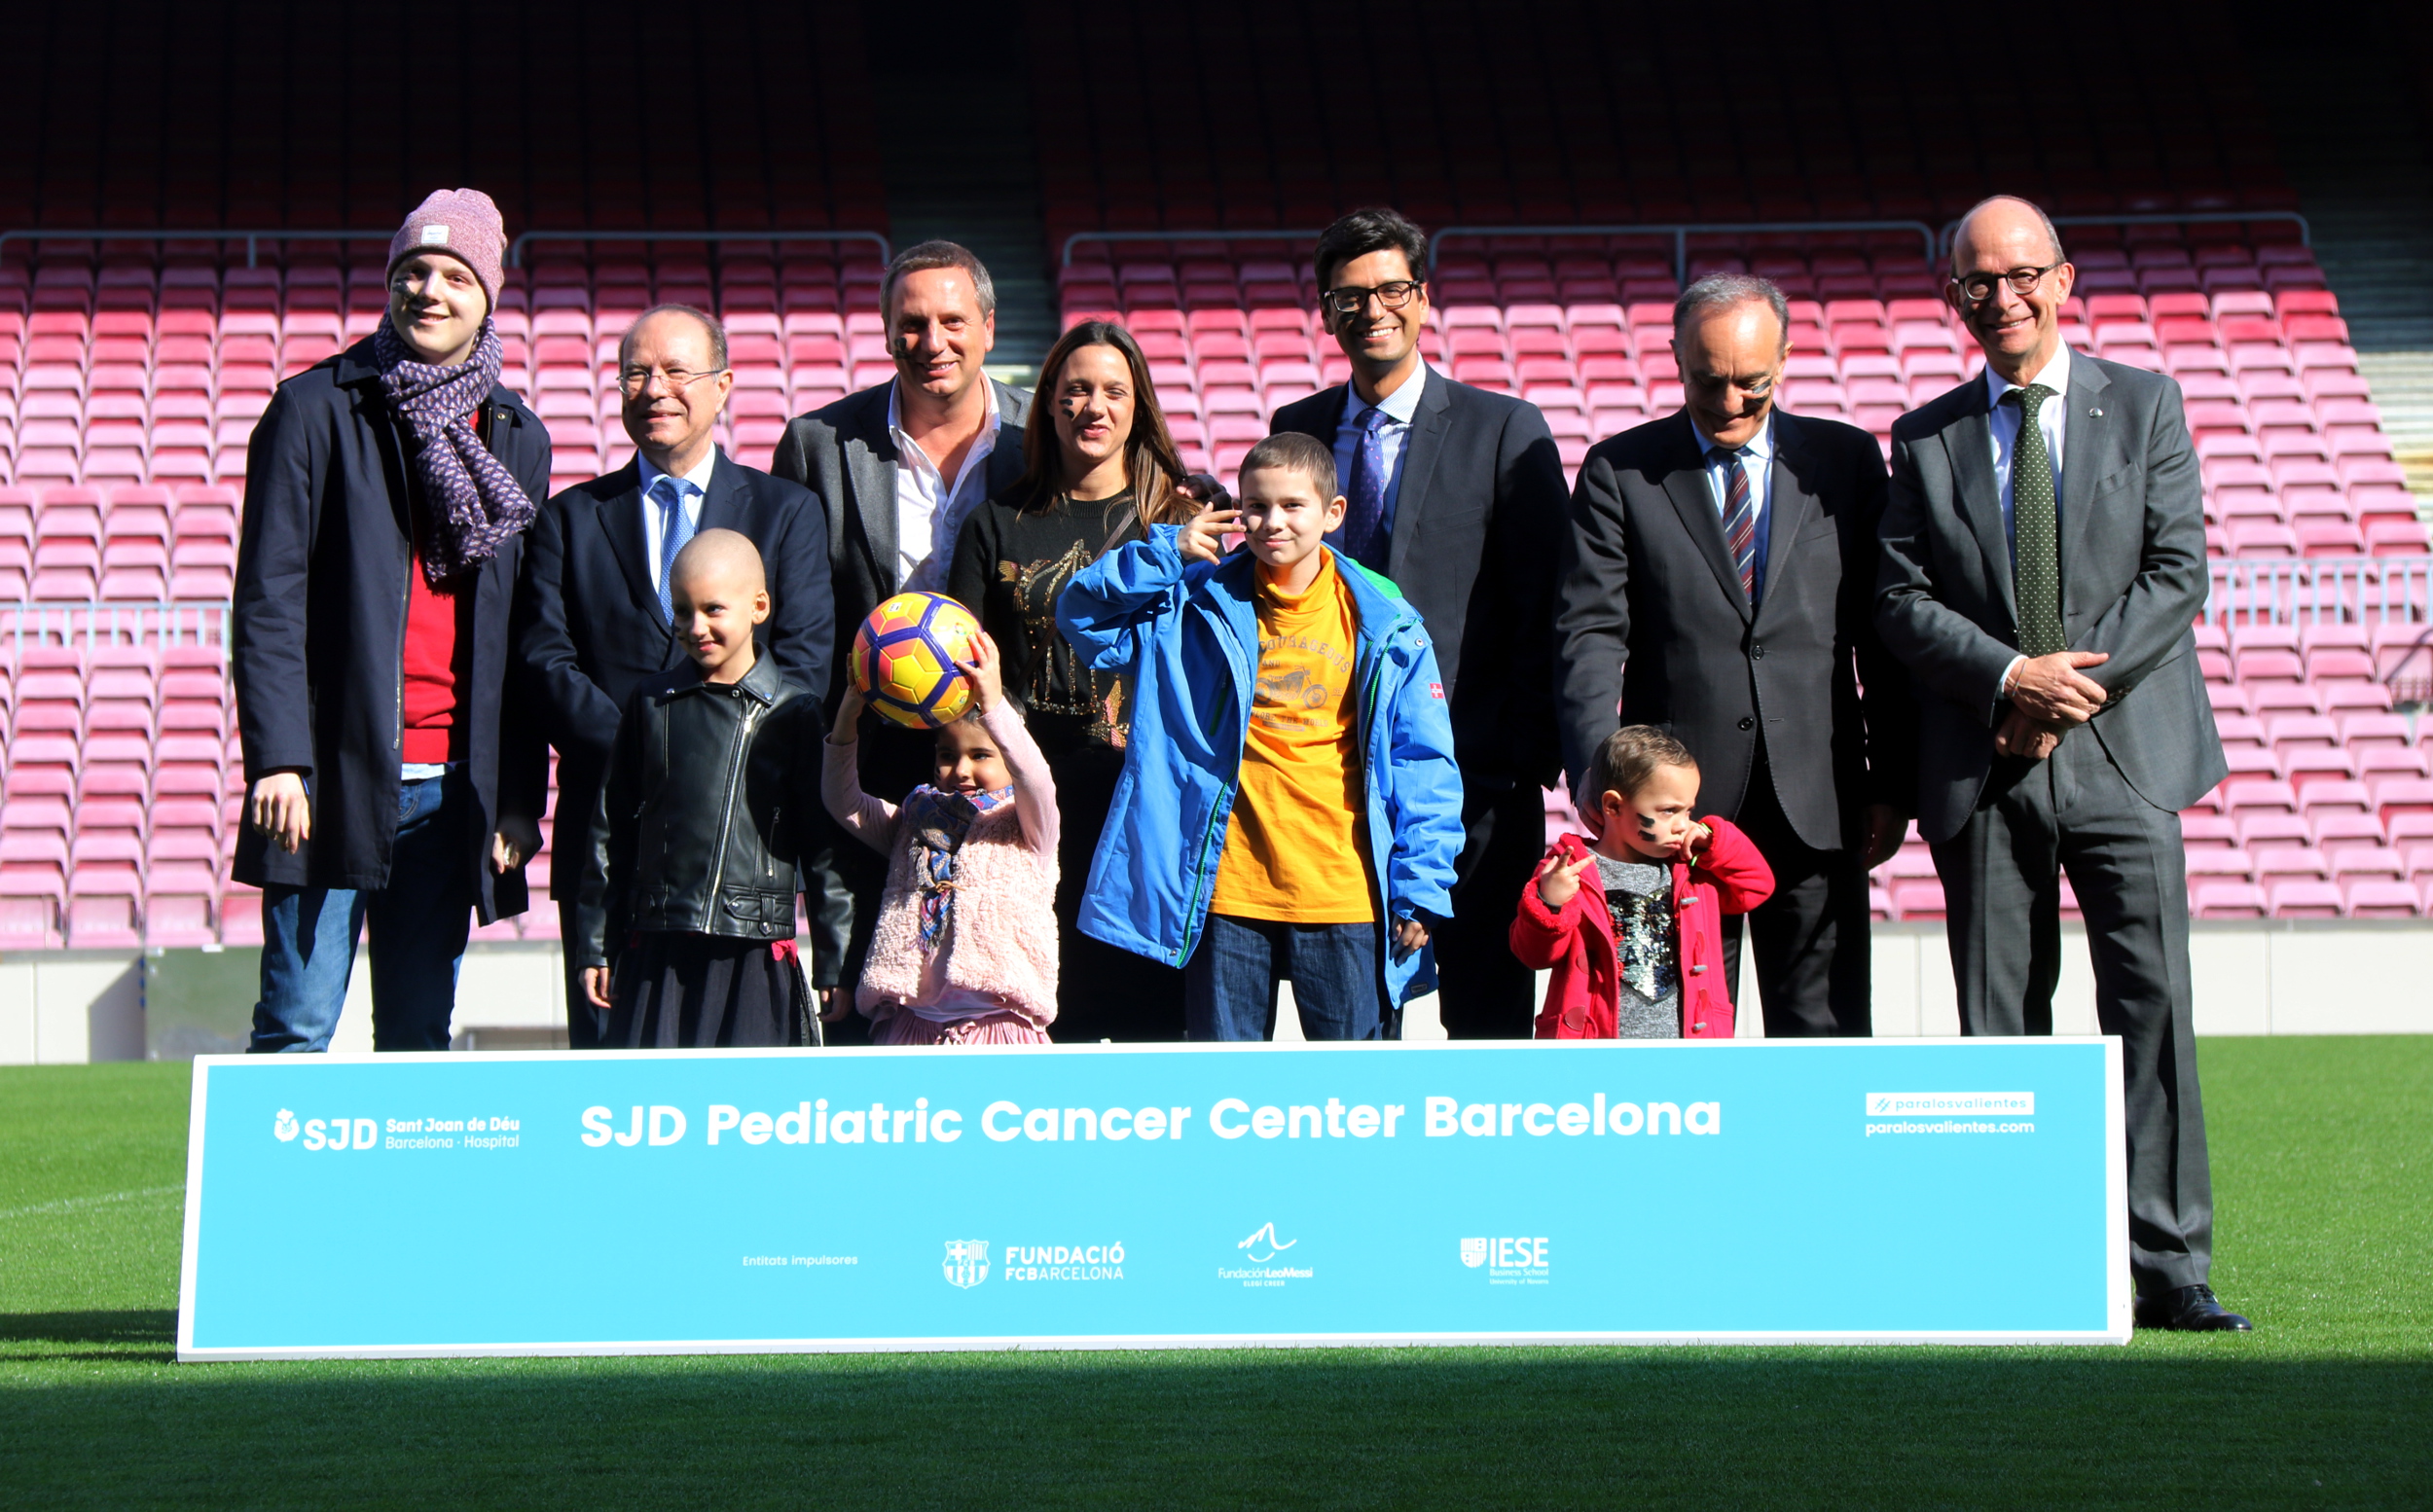 Representatives from Hospital Sant Joan de Déu, the Leo Messi Foundation, the FC Barcelona Foundation and the IESE, who launch a campaign to help funding the SJD Pediatric Cancer Center (by ACN) 